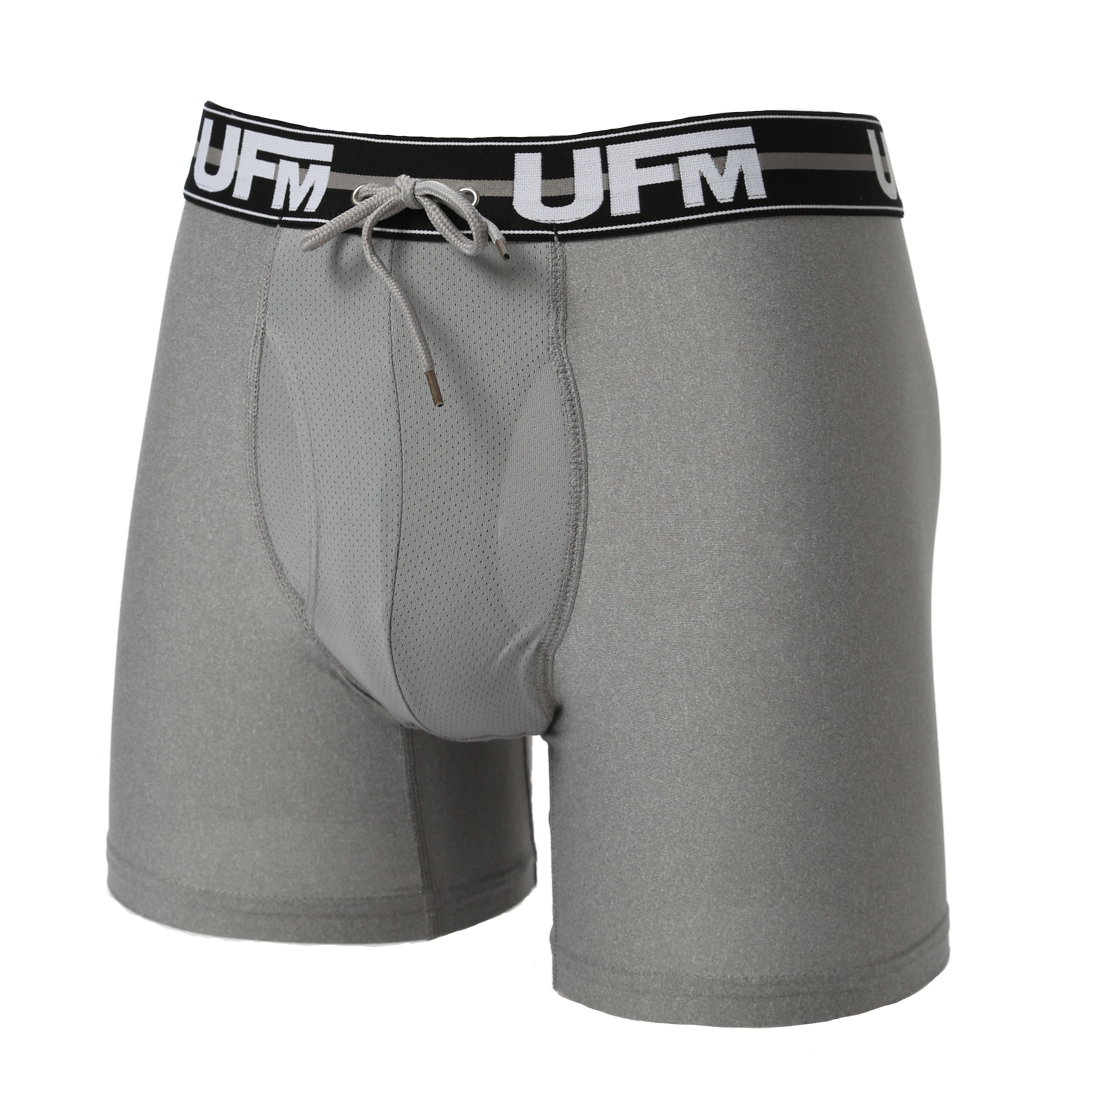 Parent UFM Underwear for Men Big and Tall Polyester 6 inch Original Max Boxer Brief Gray 800